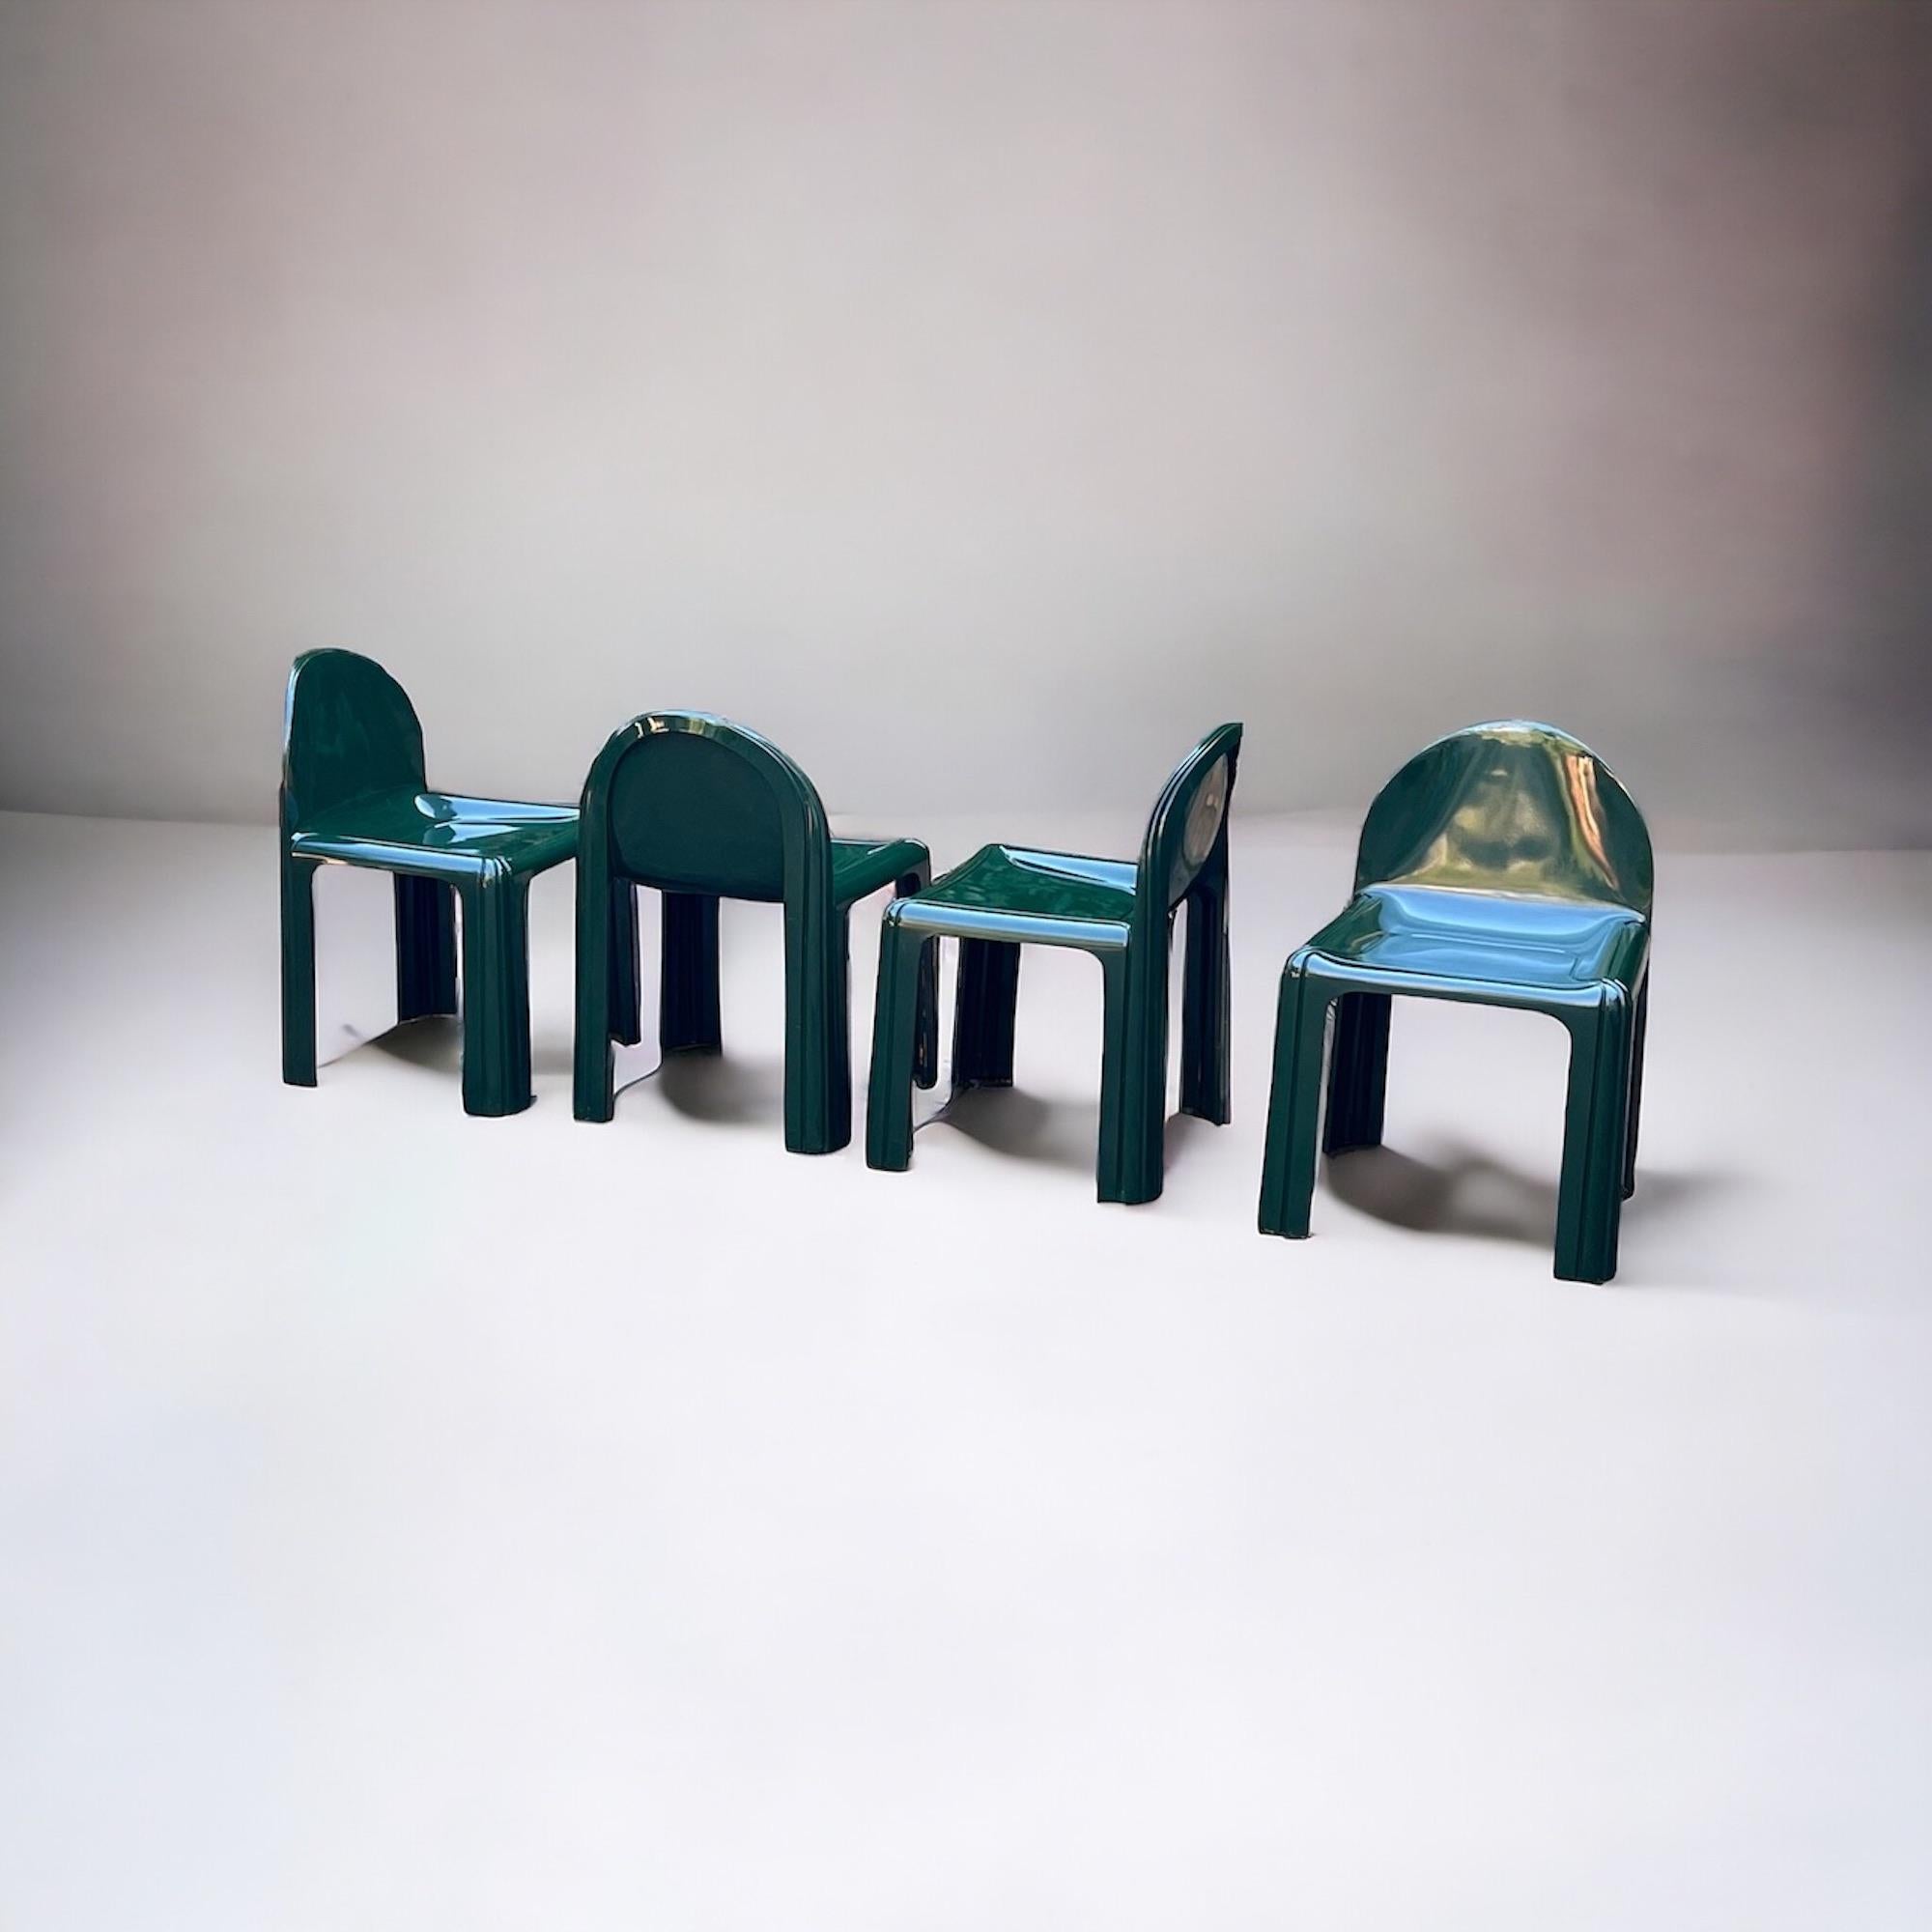 Set of 4 Green Resin Kartell Model 4854 Chairs by Gae Aulenti, 1960s For Sale 5